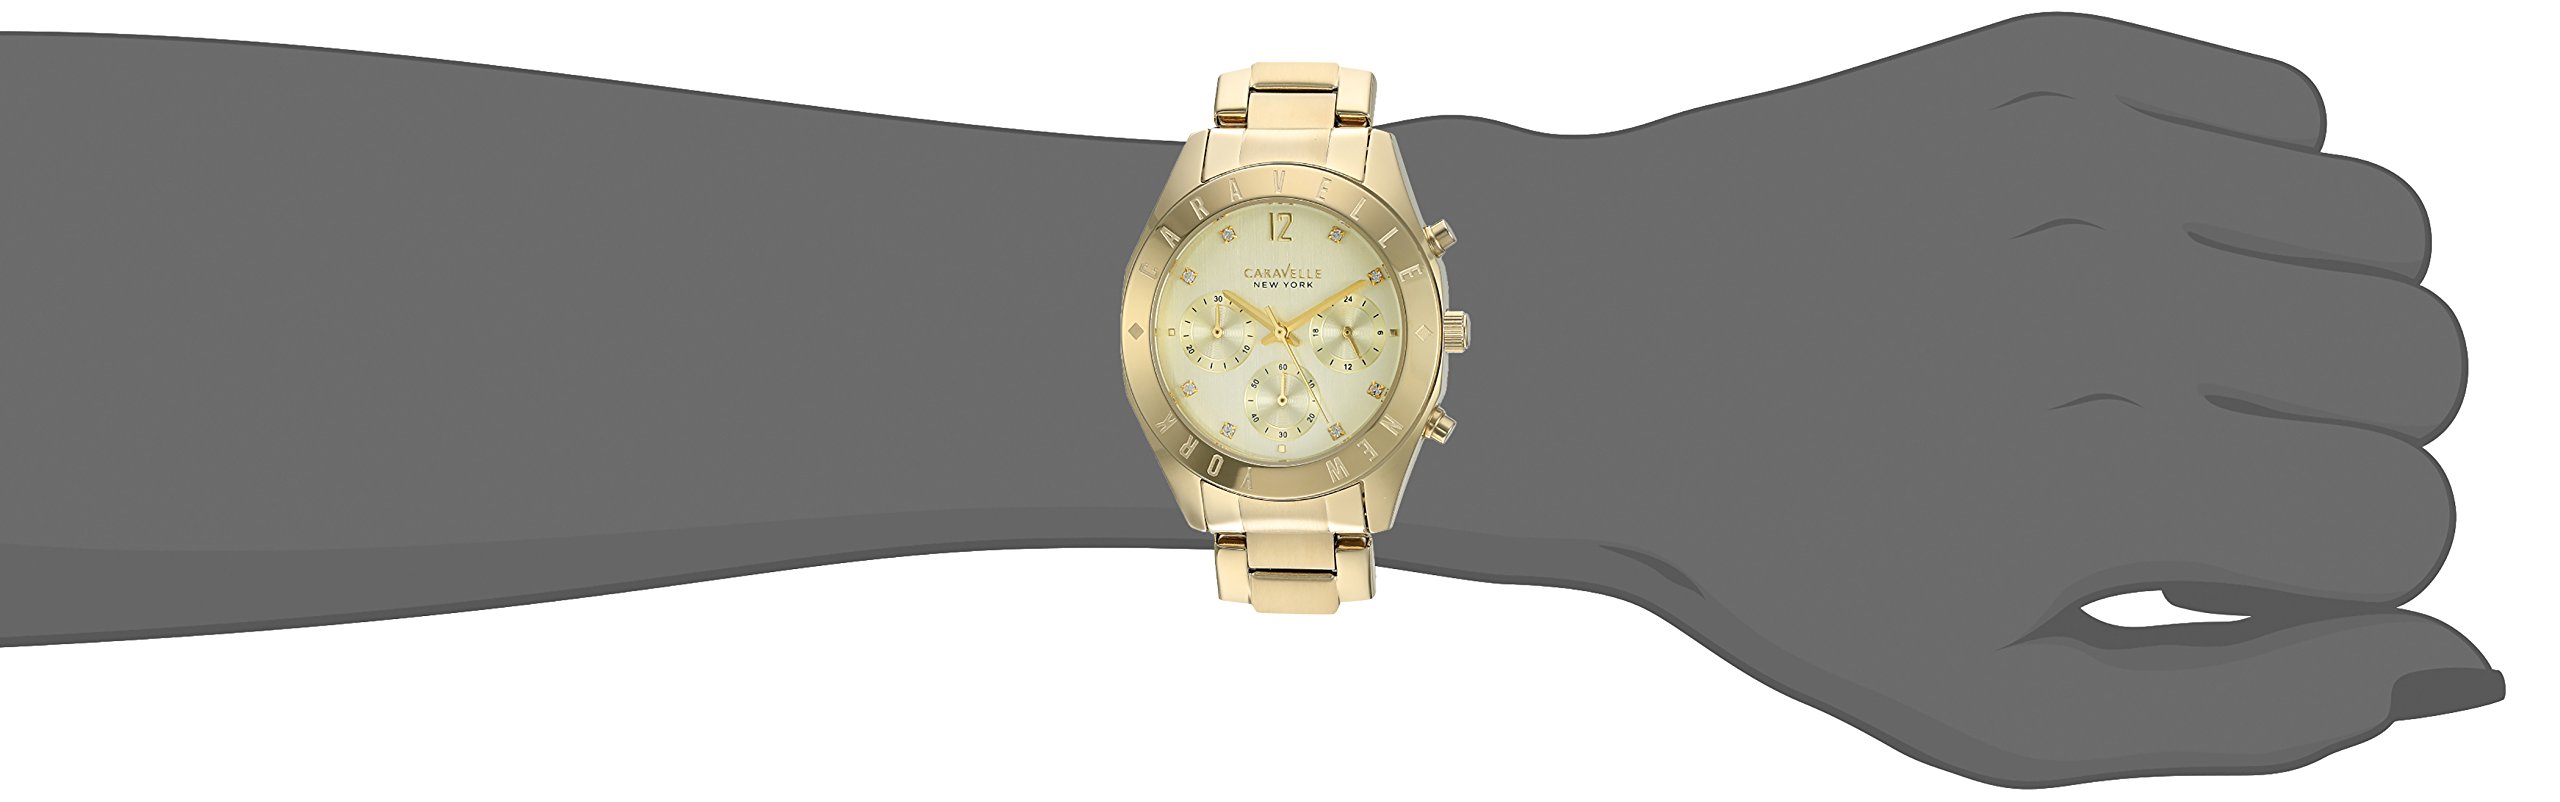 Caravelle by Bulova Sport Chronograph Ladies Watch, Stainless Steel , Gold-Tone (Model: 44L213)